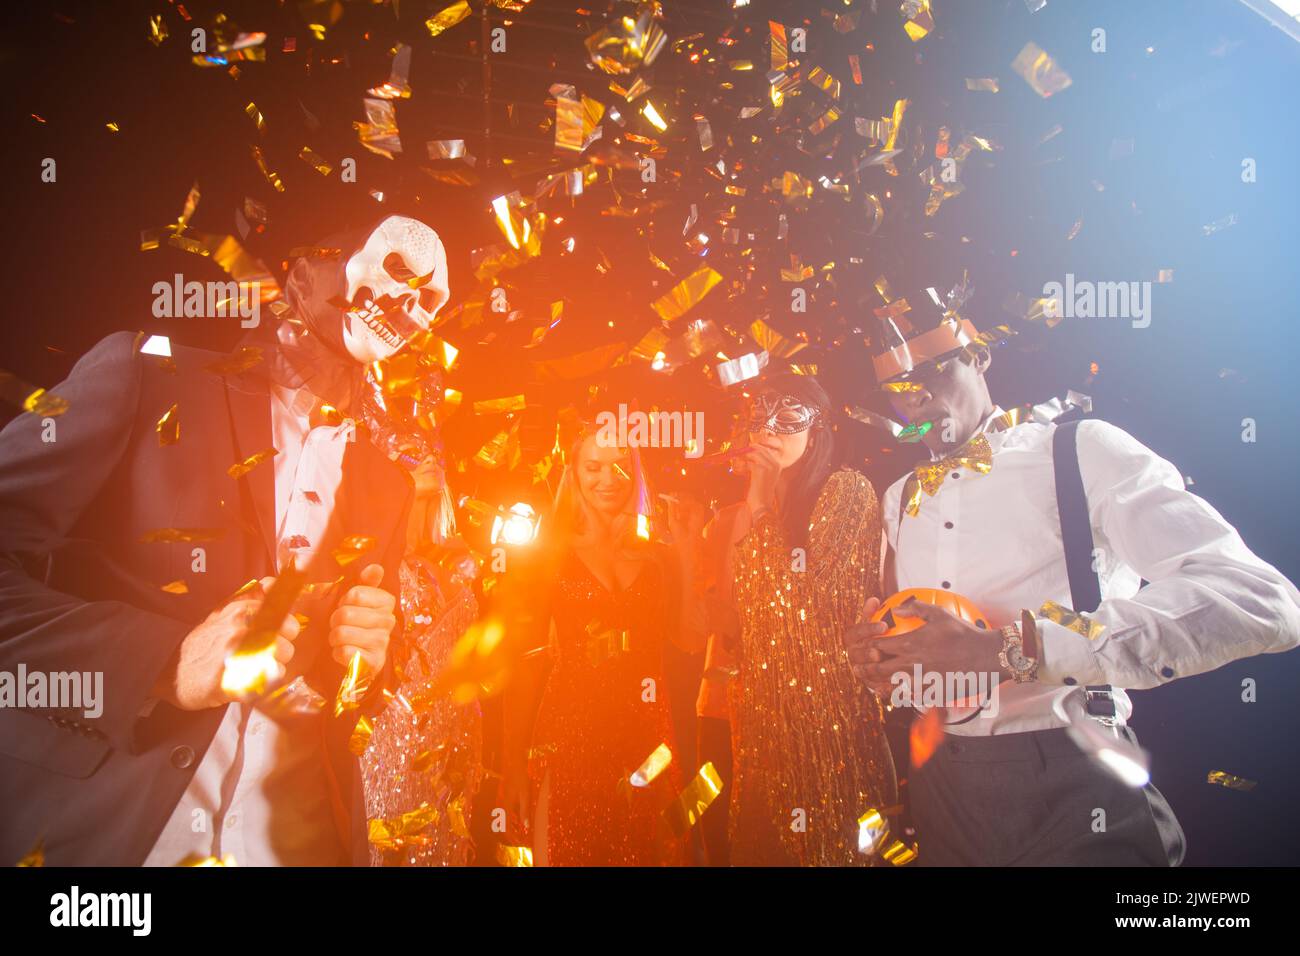 People dance at Halloween party with champagne glasses. Friends in the costumes in nightclub Stock Photo